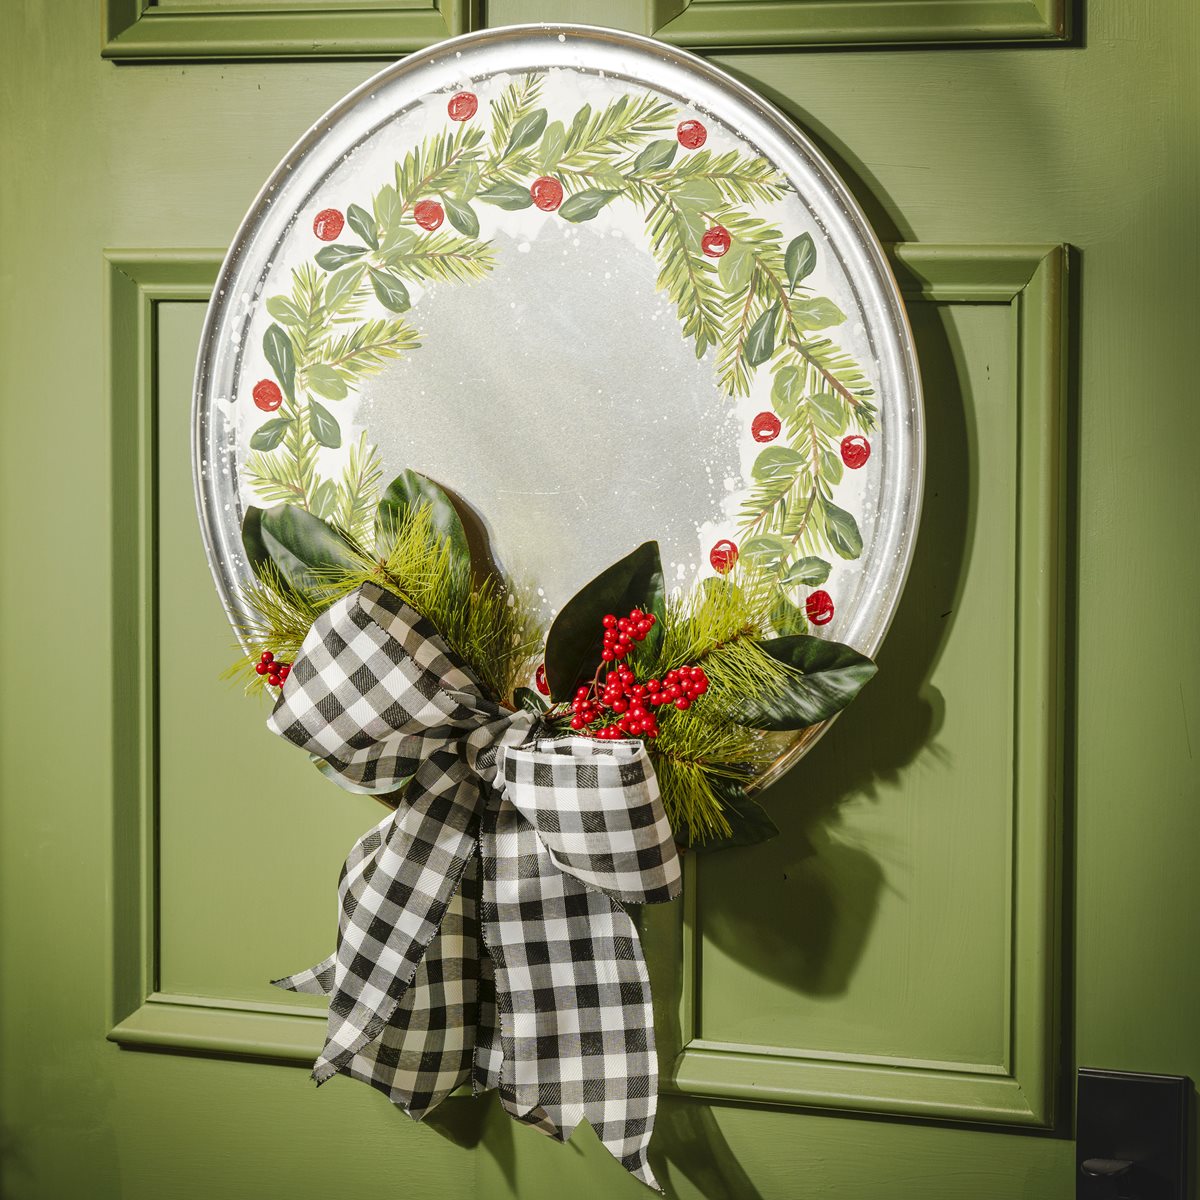 Upcycled Baking Pan Christmas Wreath - Project